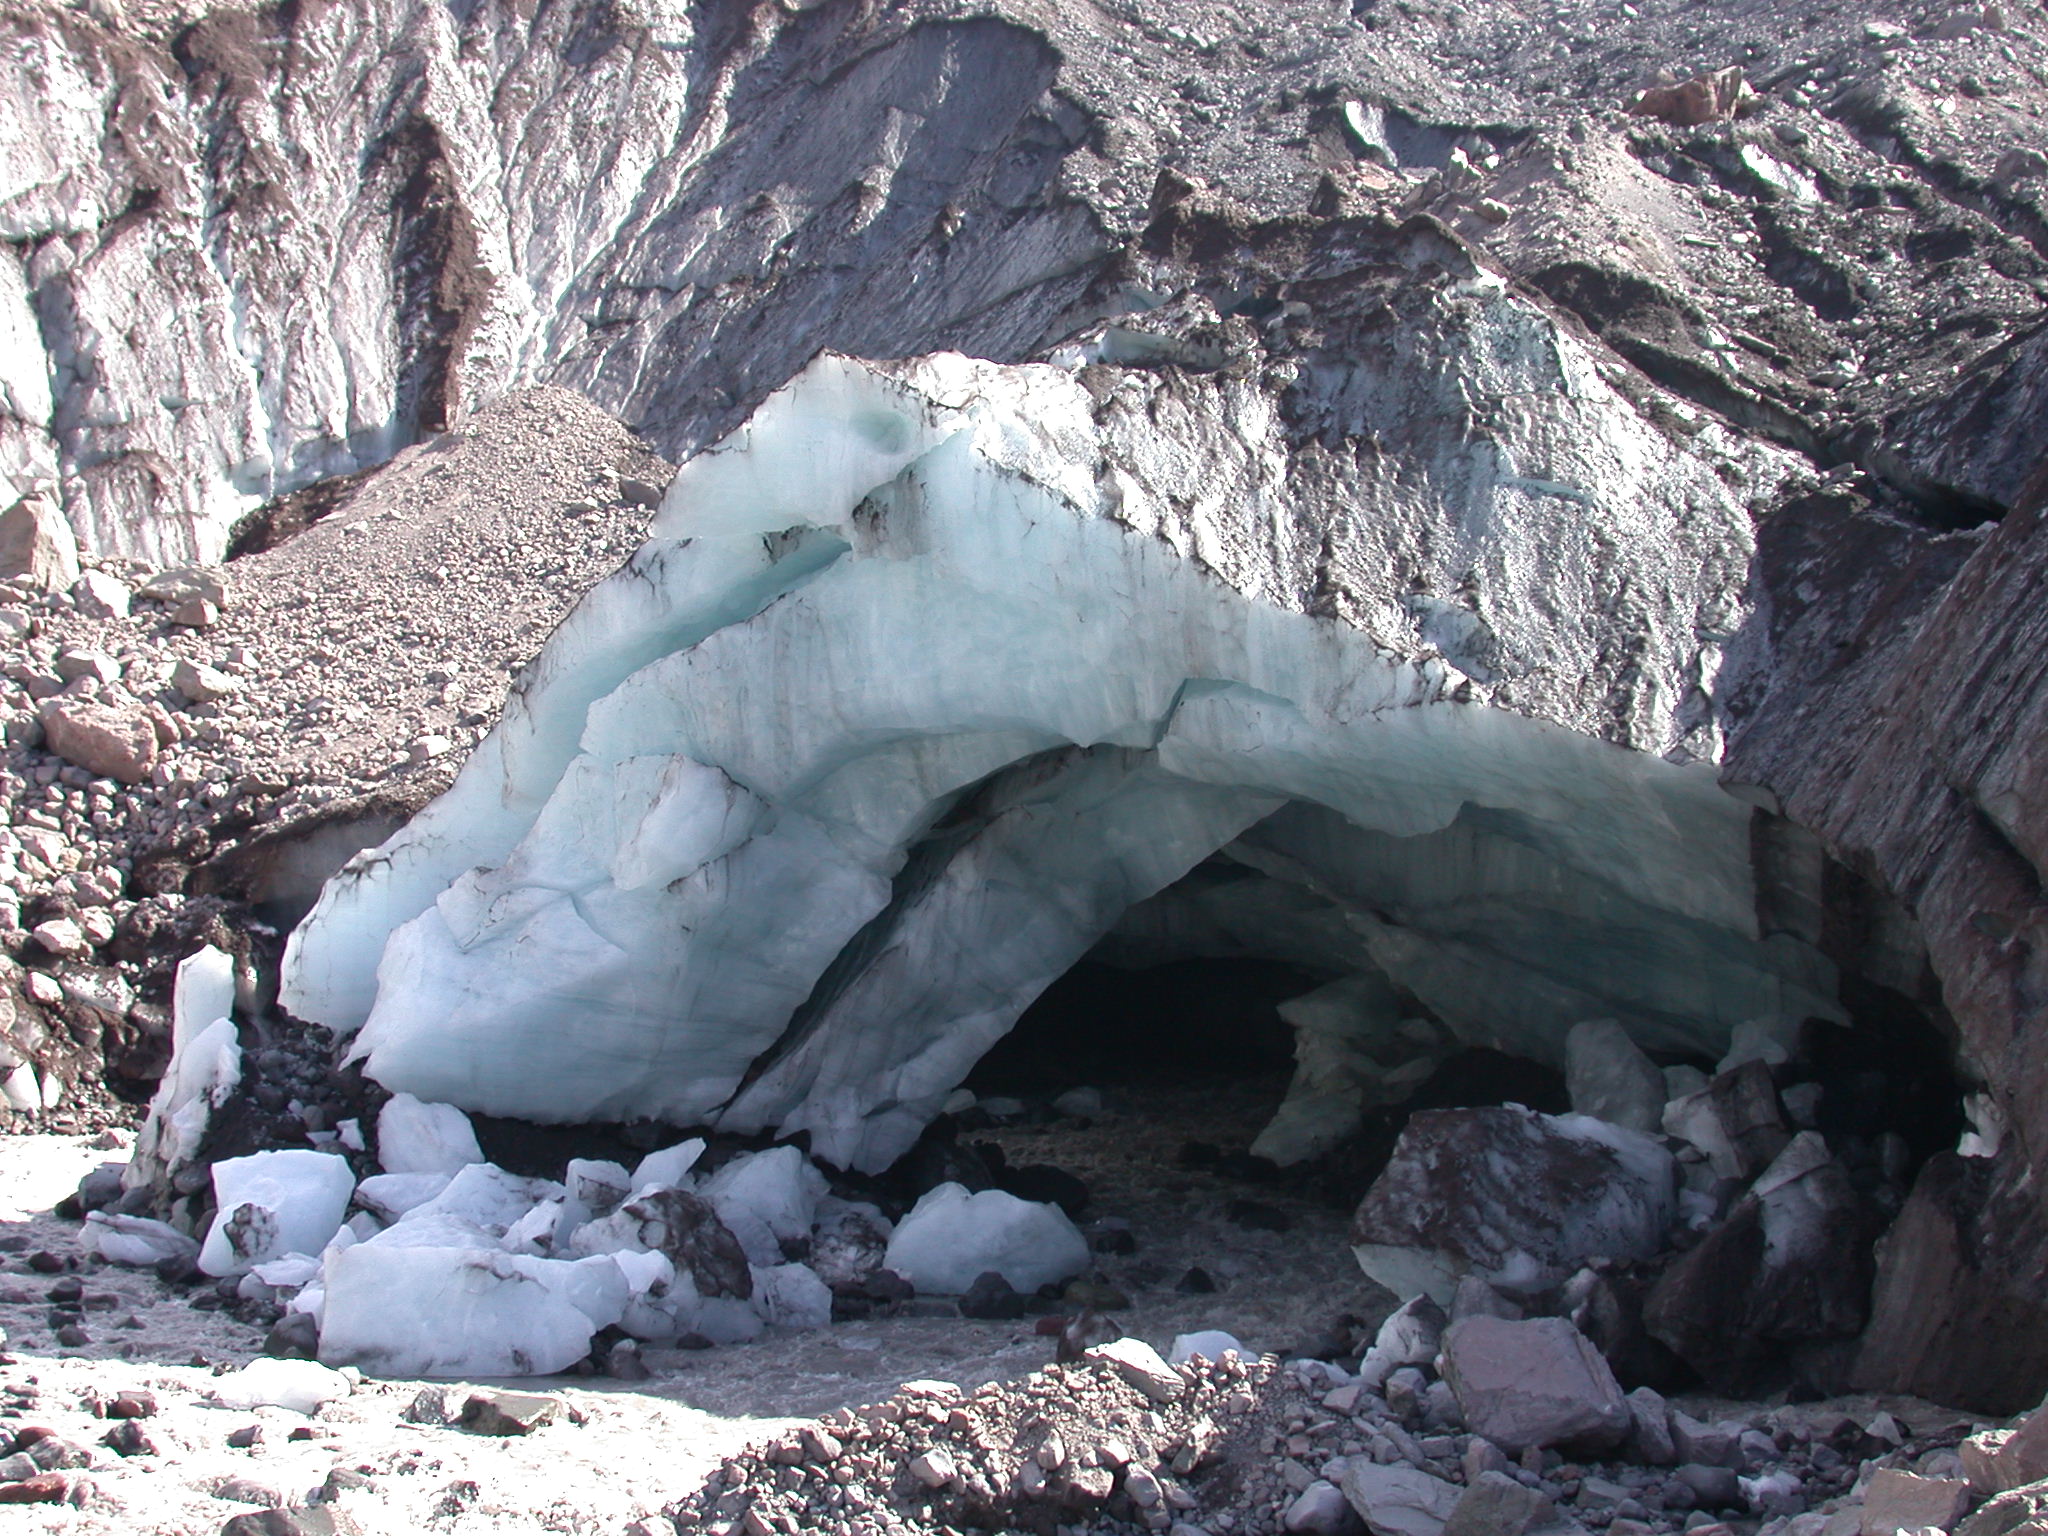 More of the Alabaster Ice Cave at Base of Glacier on Mount Rainier